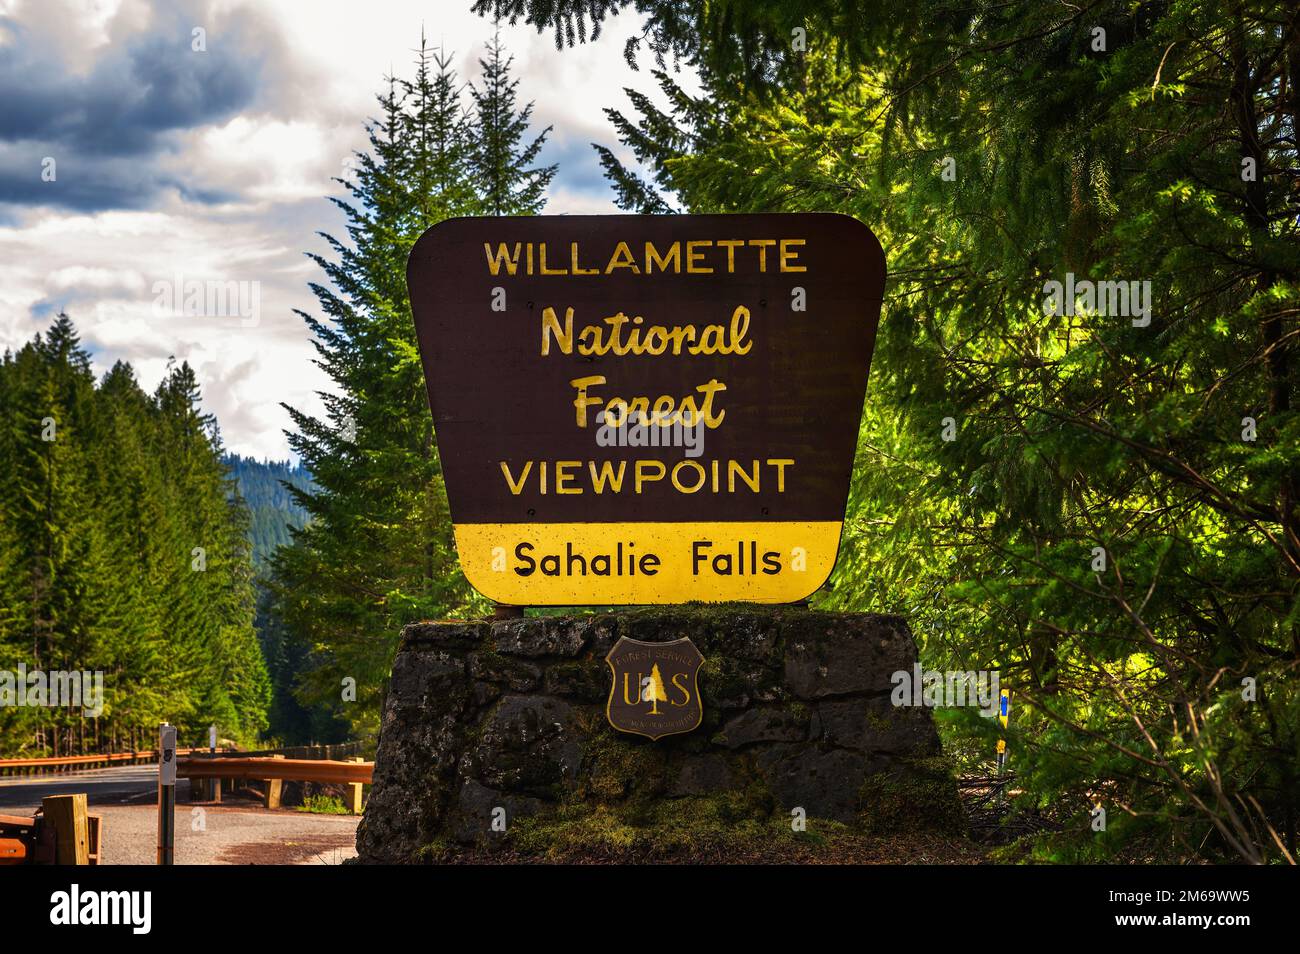 Sahalie Falls in Willamette National Forest street sign in Oregon Stock Photo